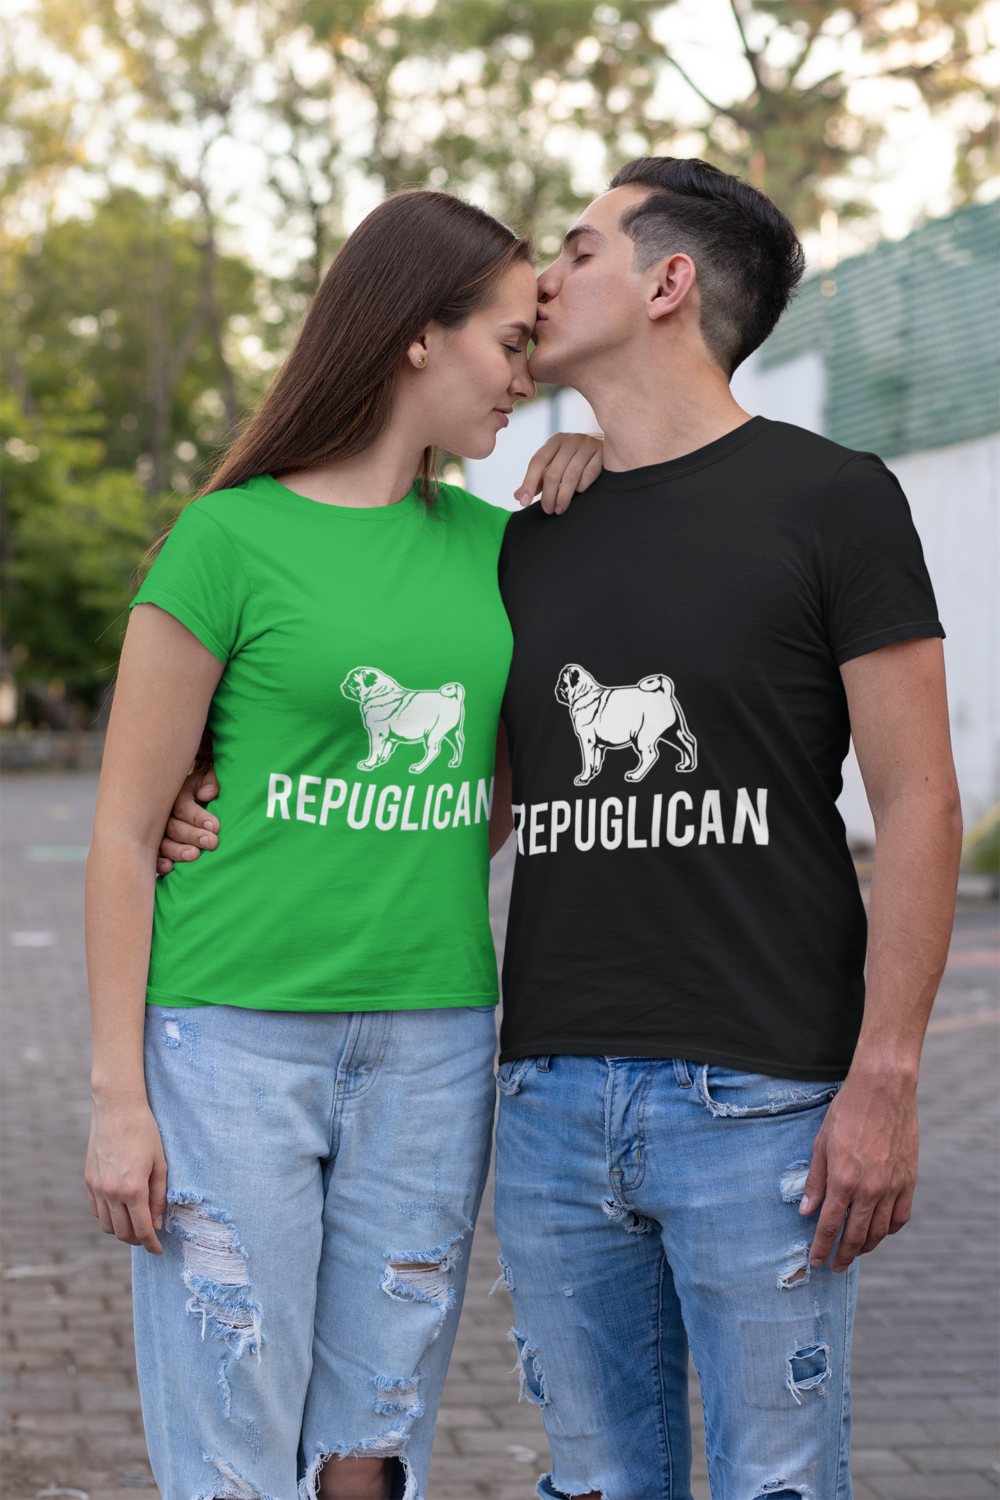 t shirt mockup of a man kissing his girlfriend on the street 30747